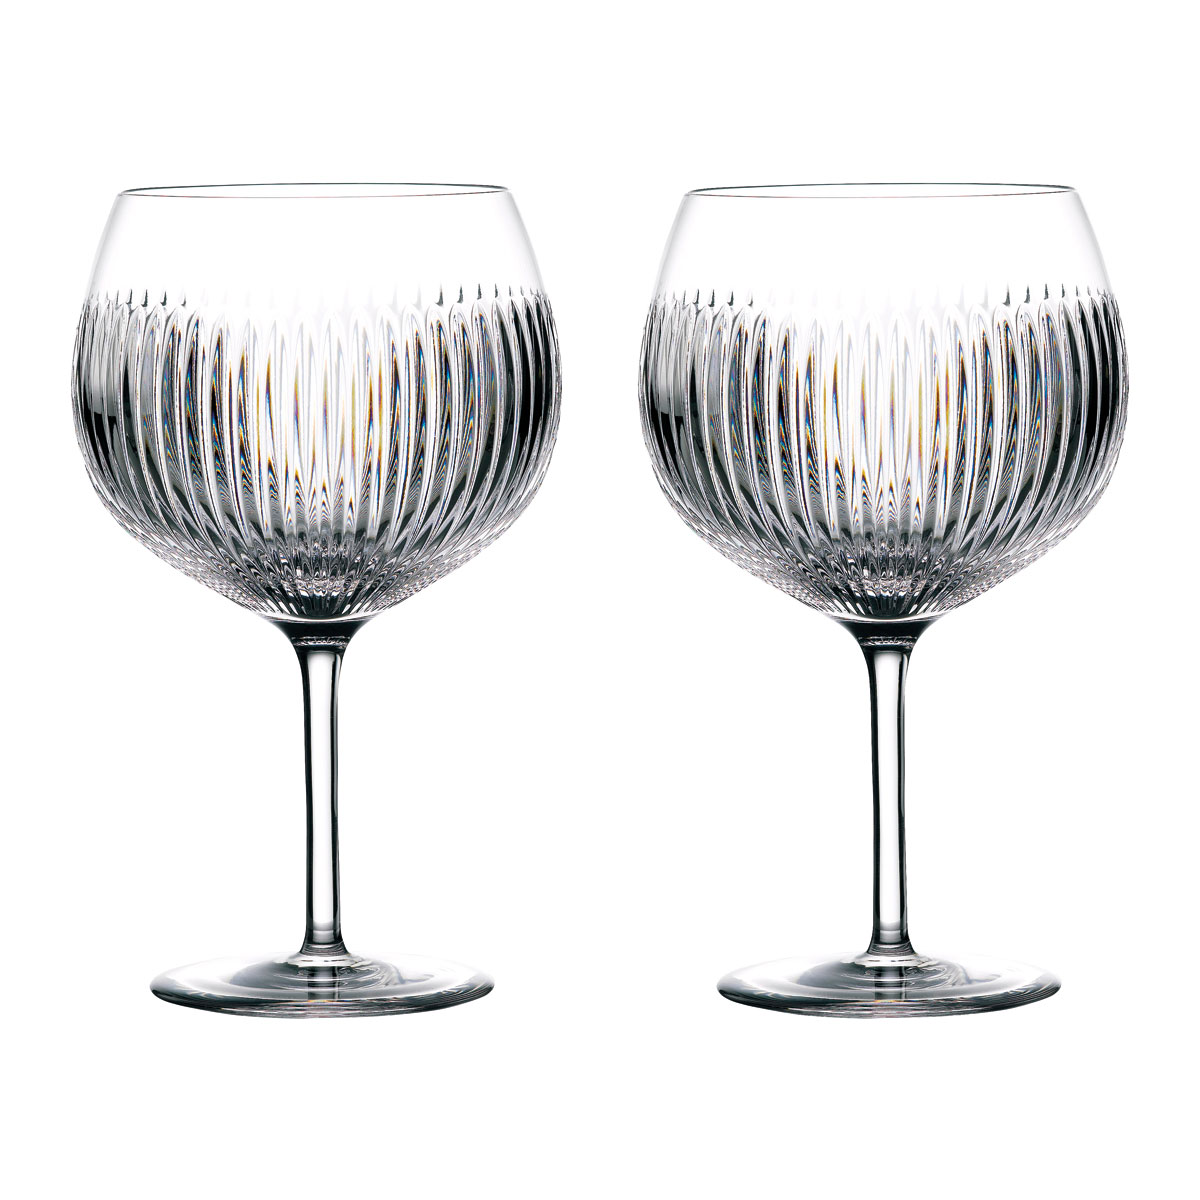 Waterford Crystal Gin Journeys Aras Balloon Glasses, Pair